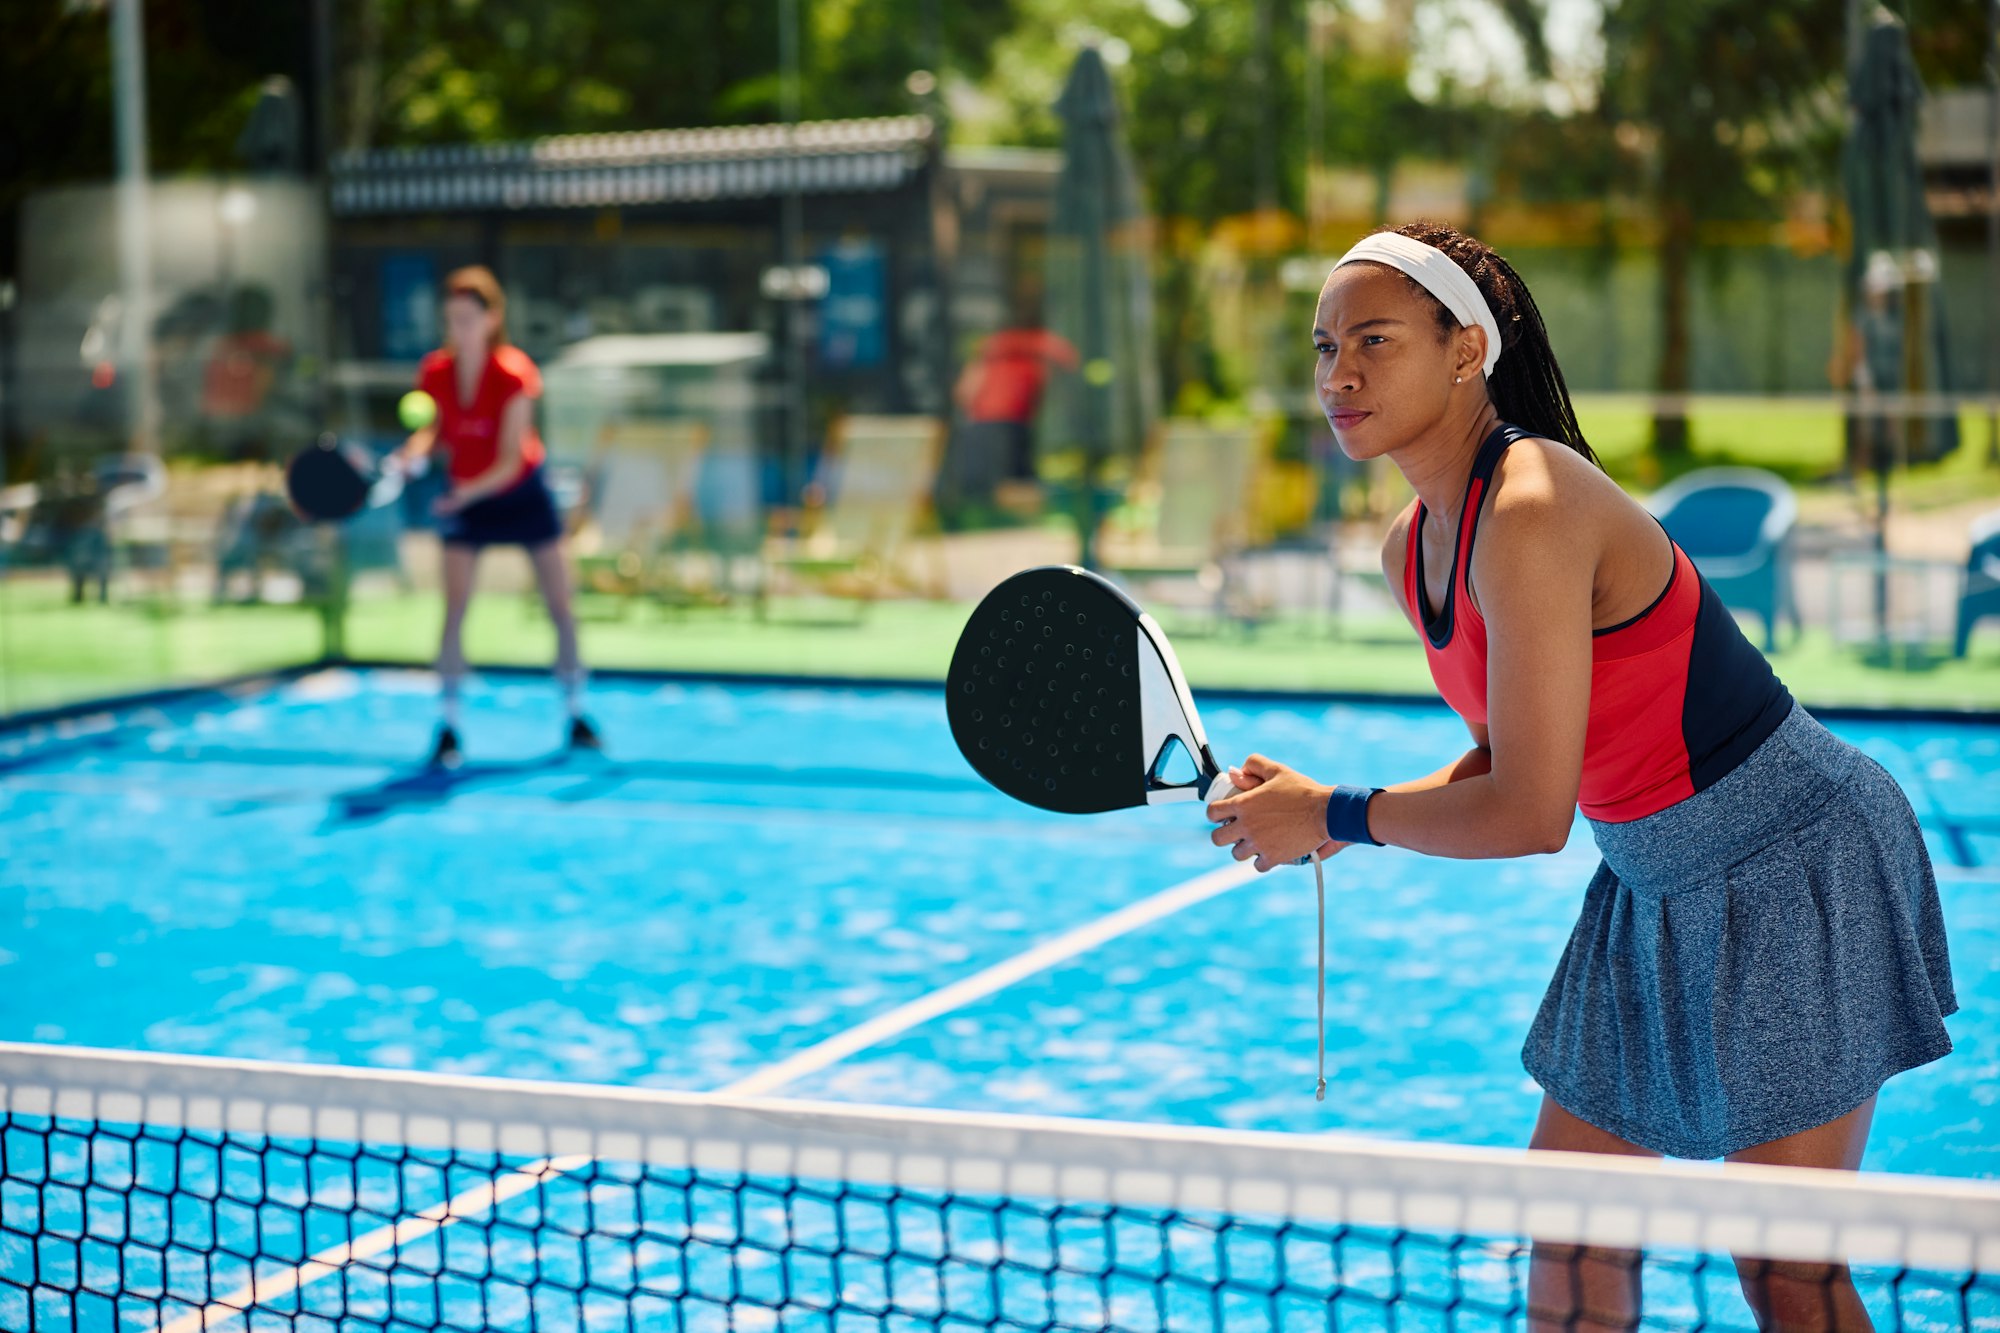 Black female athlete playing padel tennis doubles match on outdoor court.